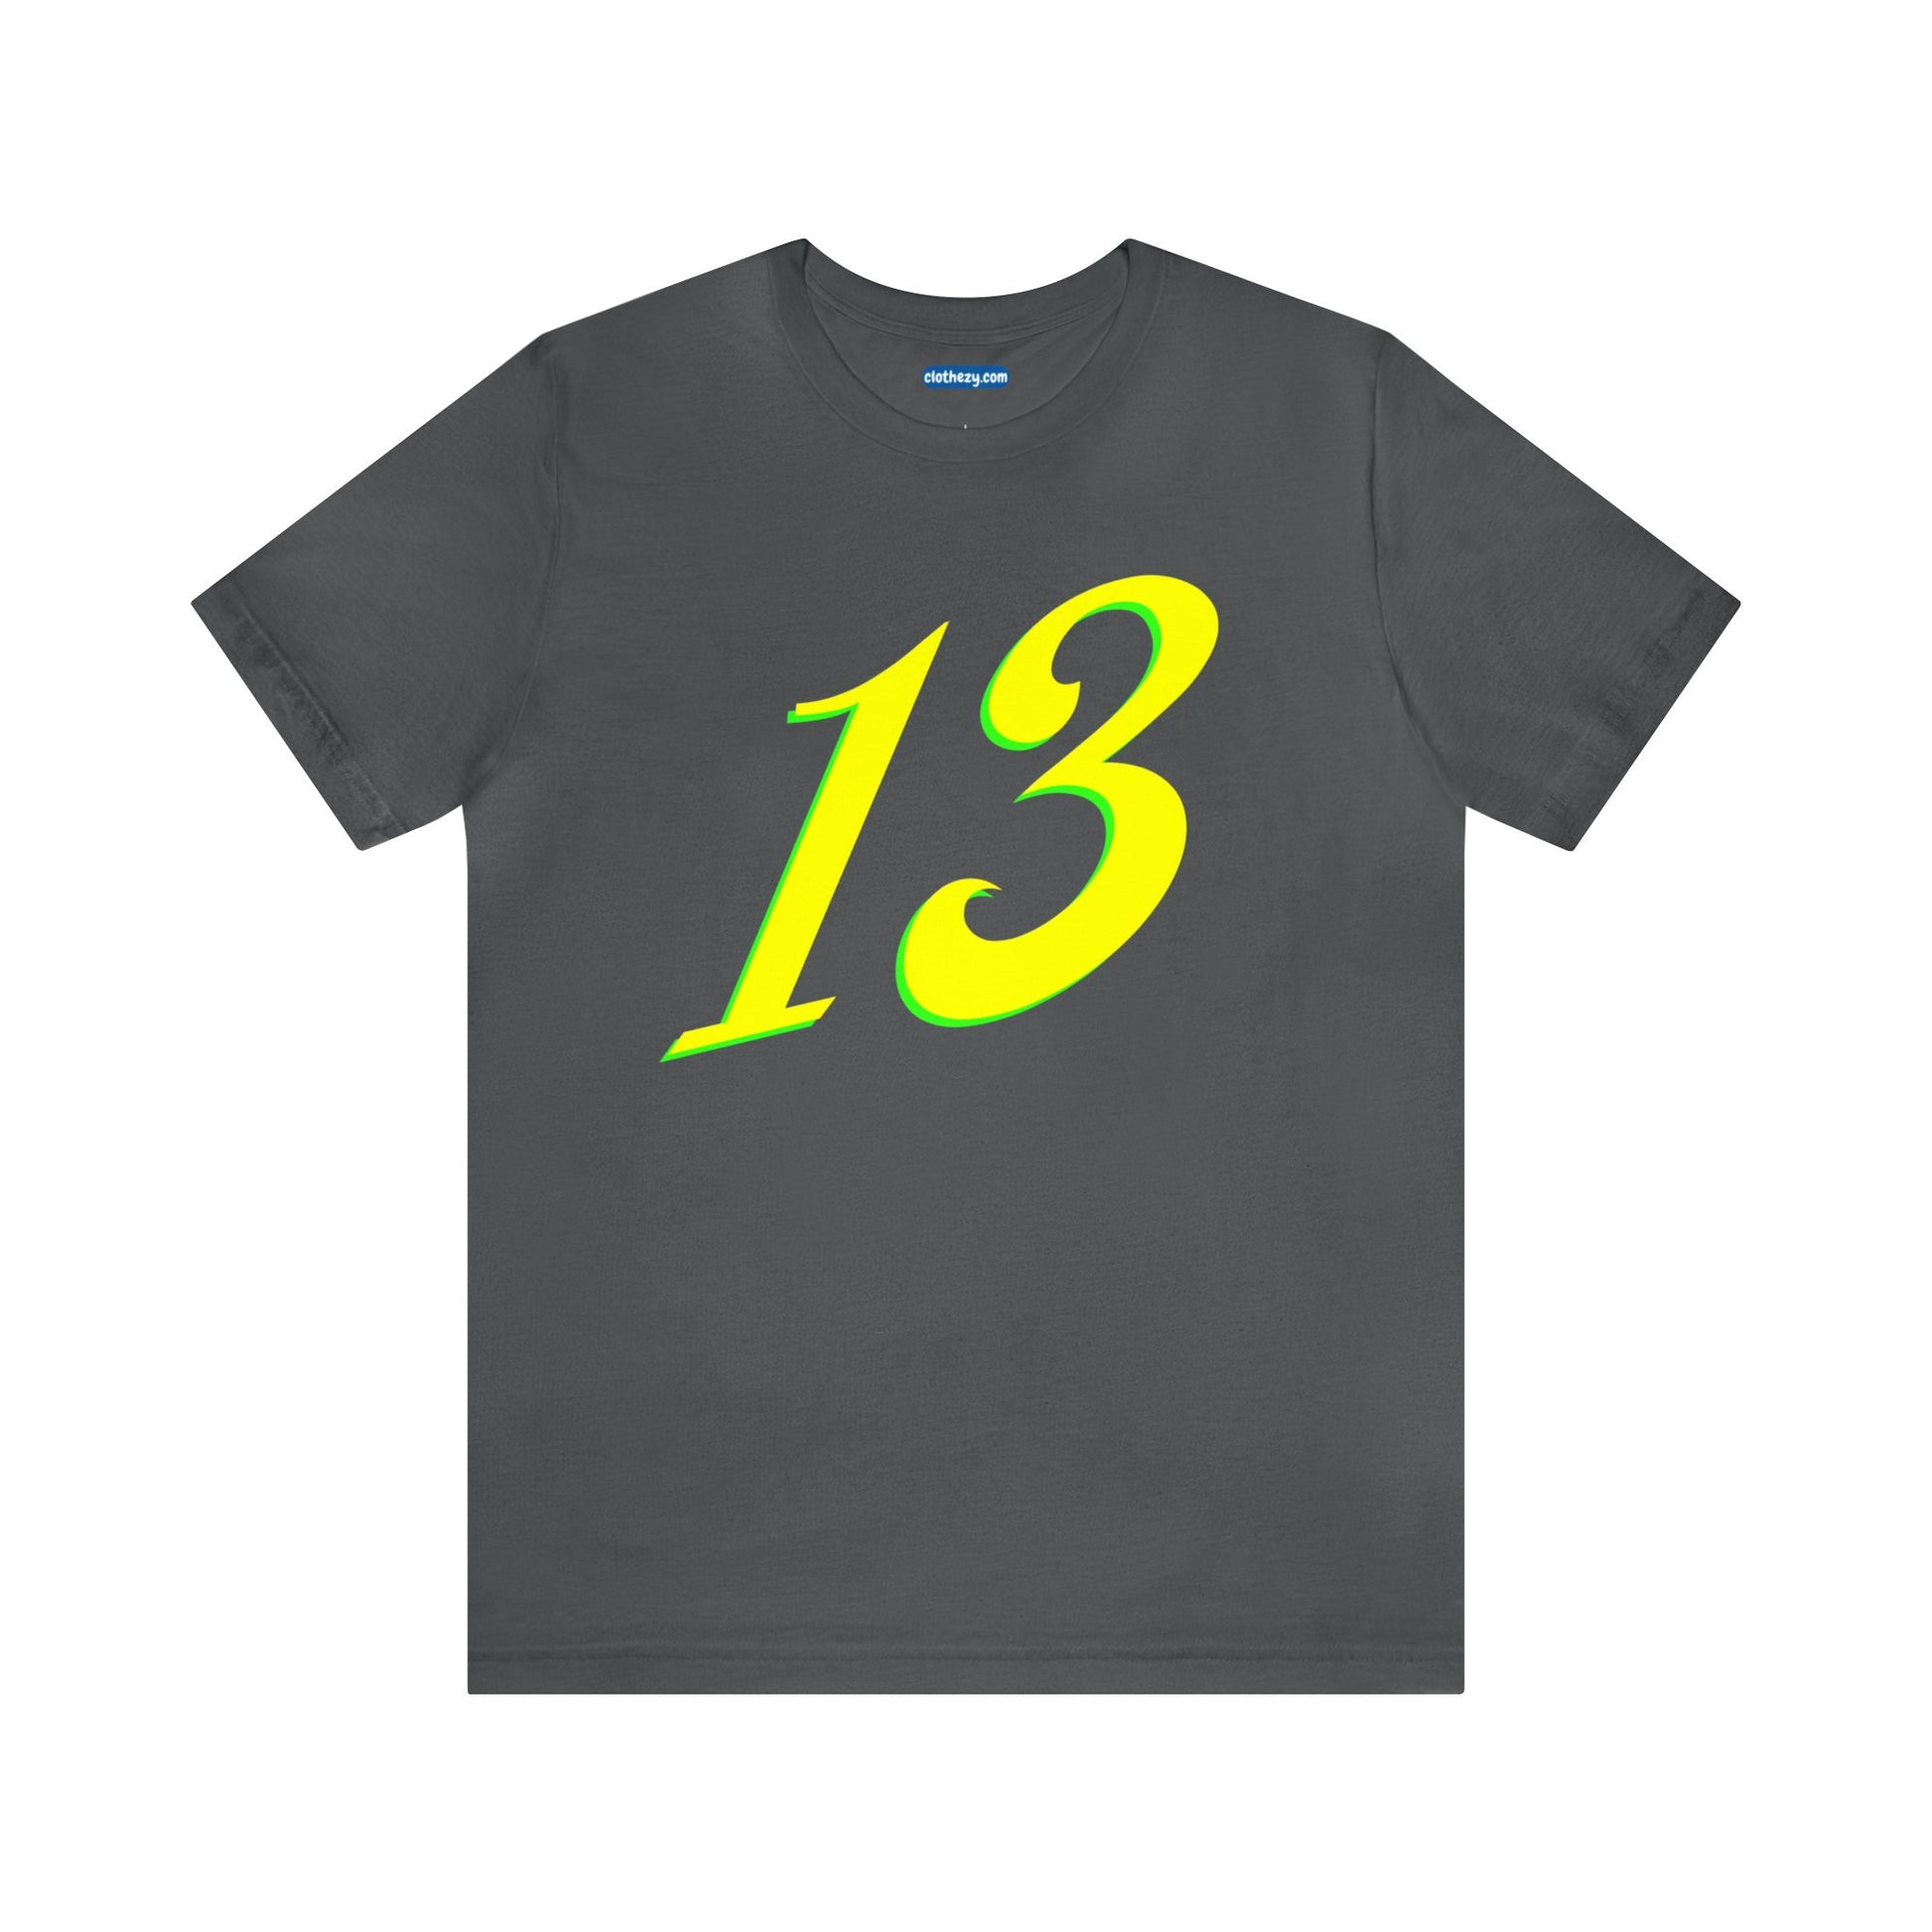 Number 13 Design - Soft Cotton Tee for birthdays and celebrations, Gift for friends and family, Multiple Options by clothezy.com in Black Size Small - Buy Now